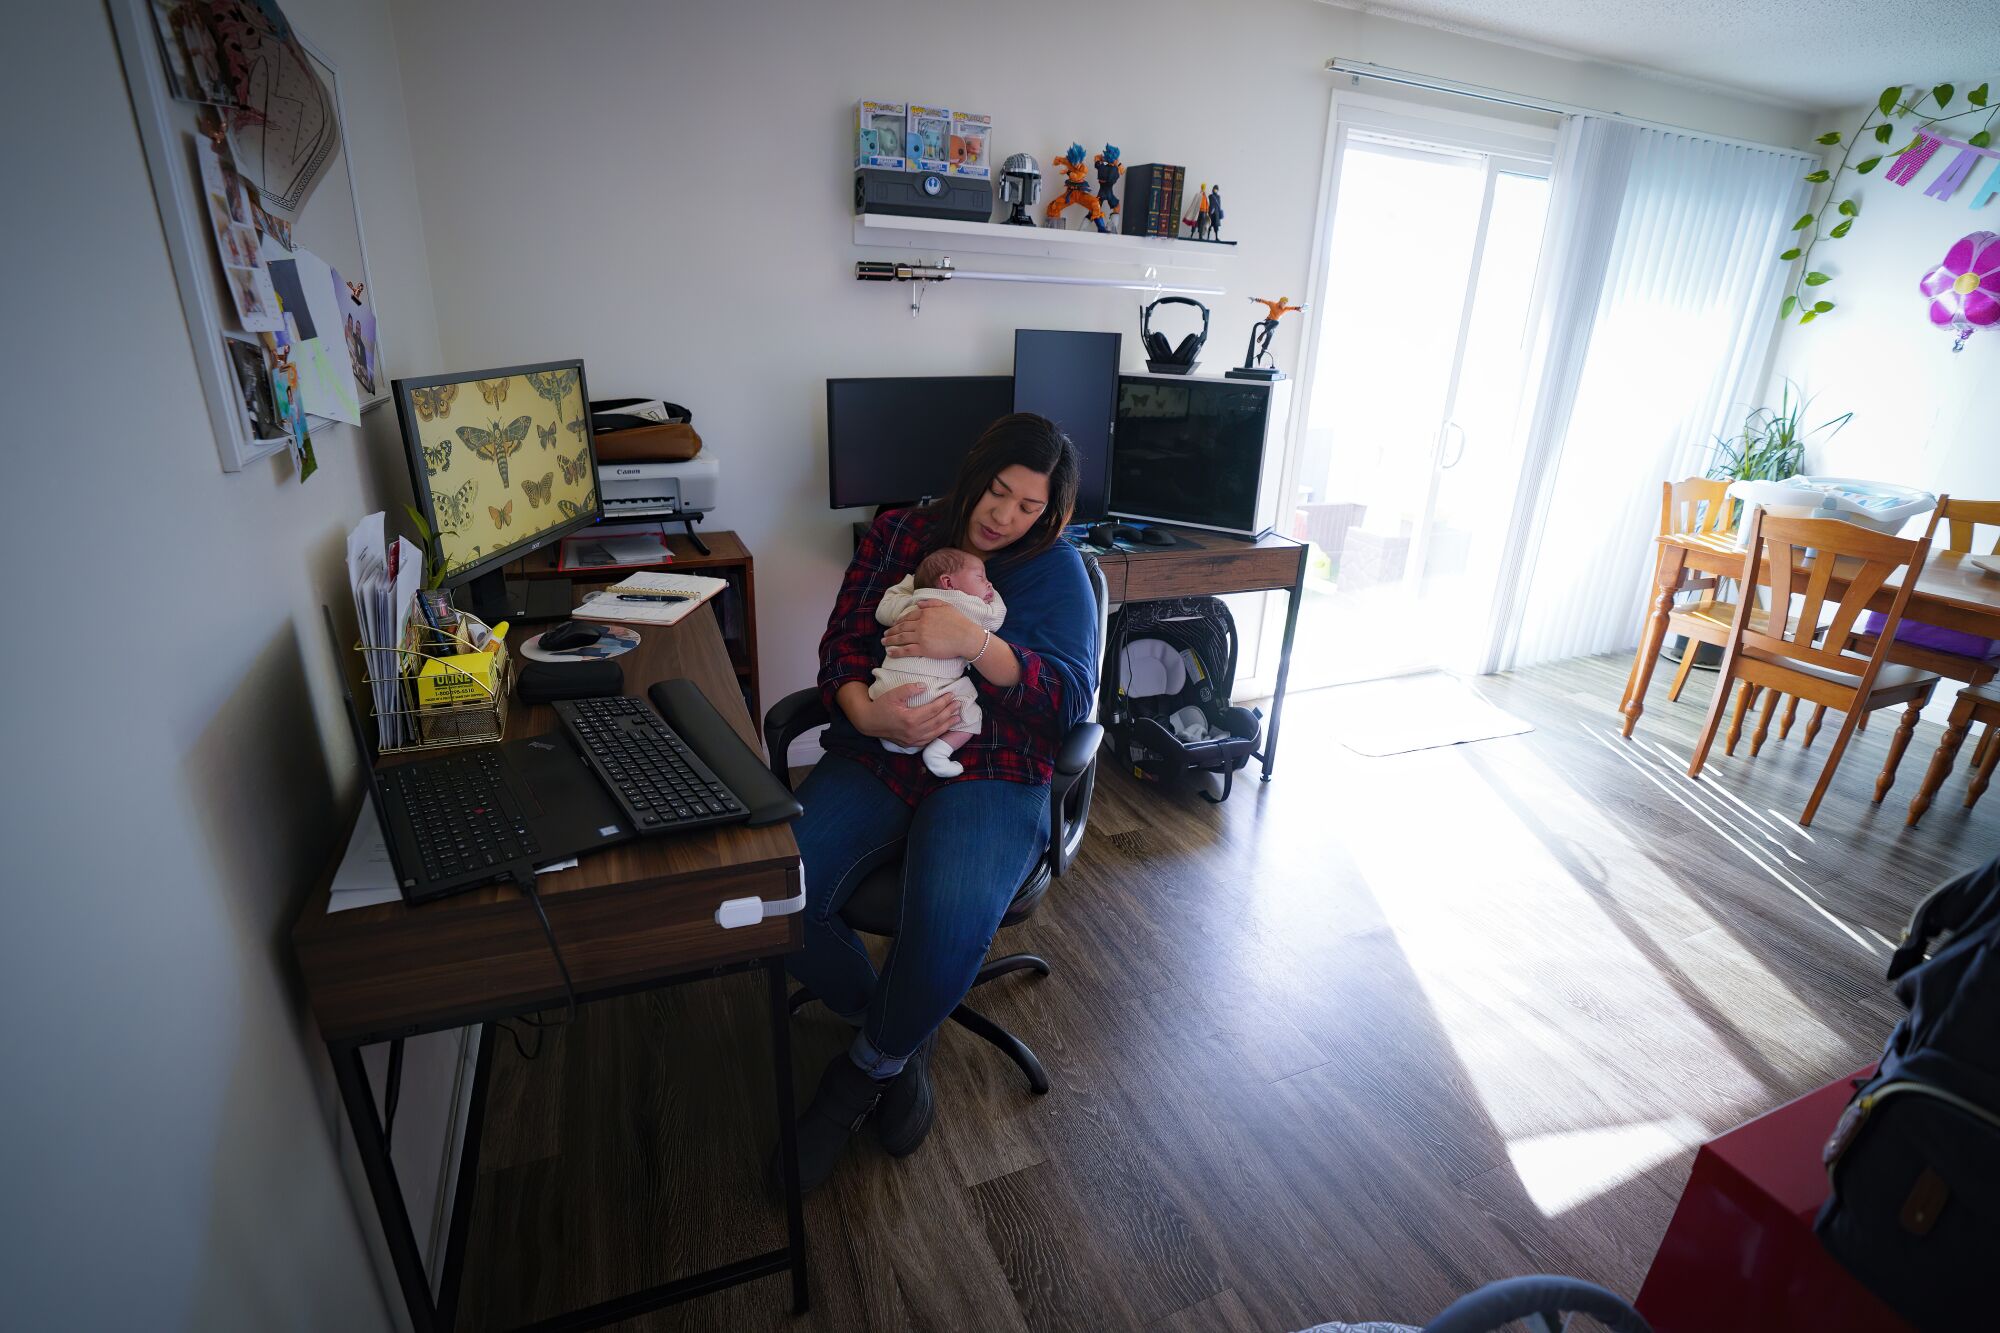 A woman sits at a desk in her living room, cradling a baby.